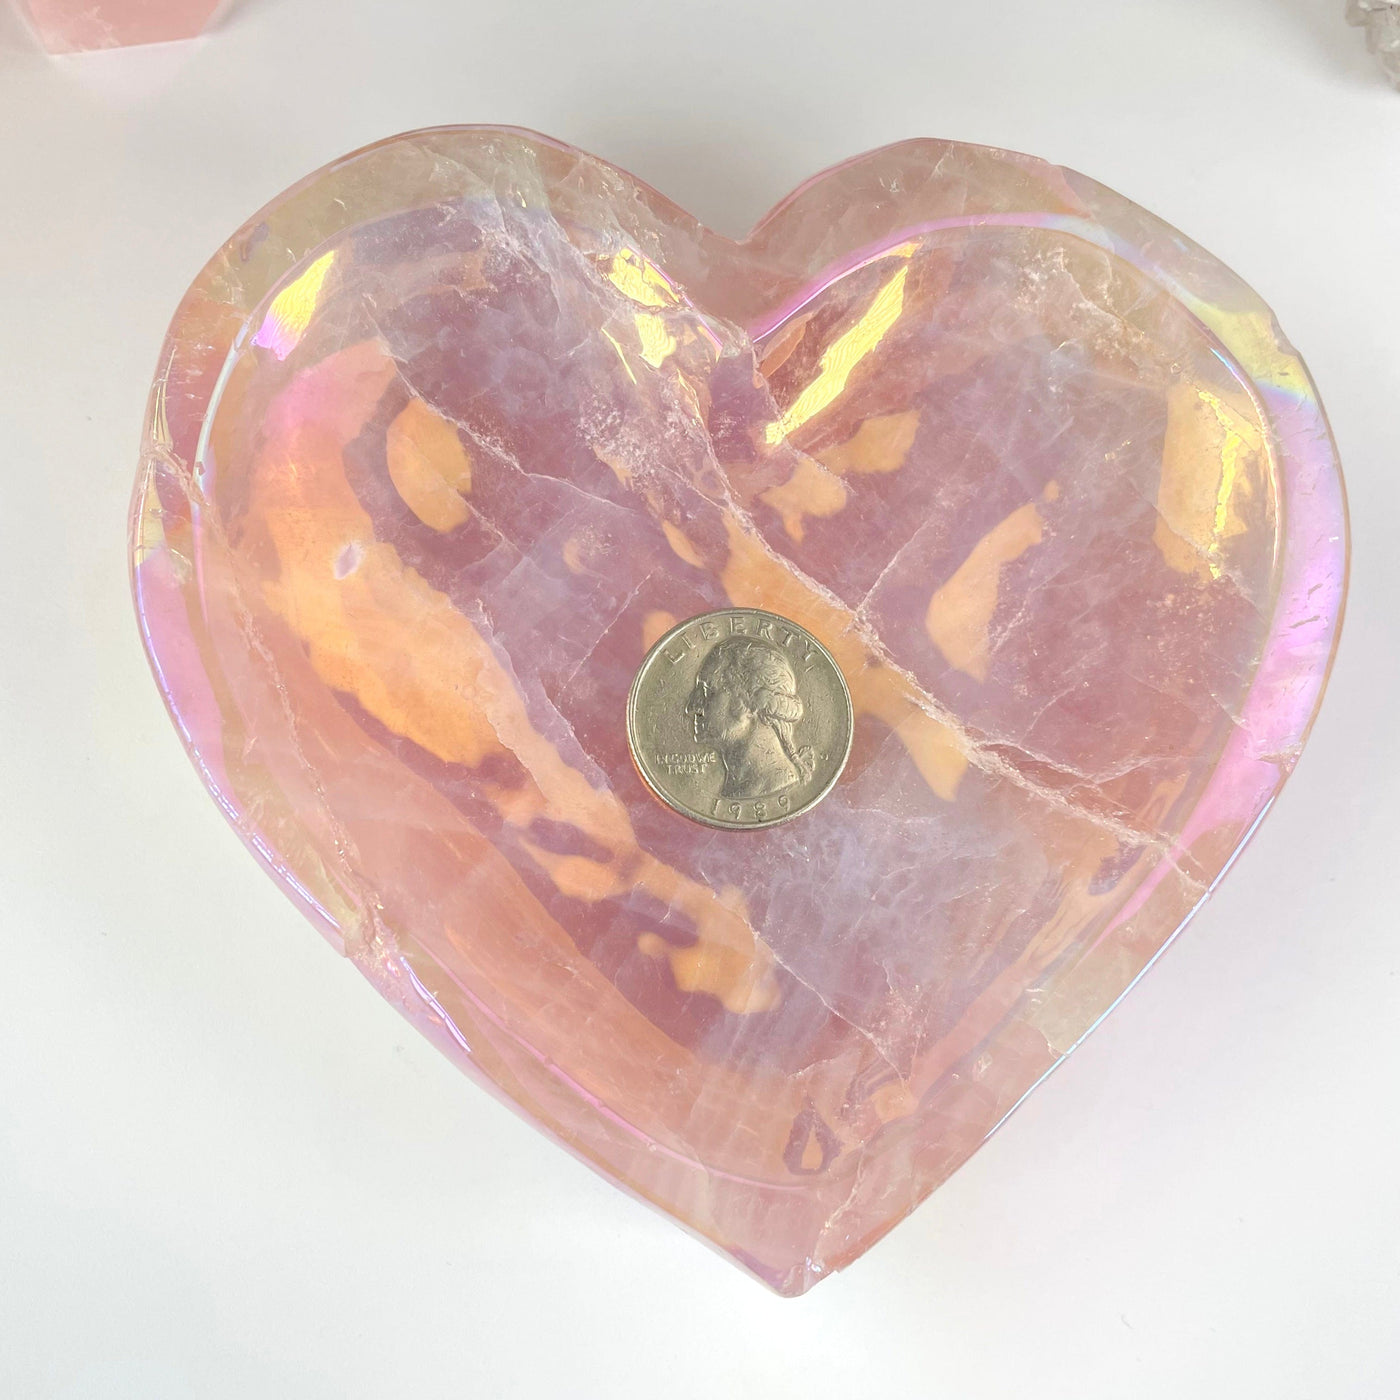 overhead view of angel aura rose quartz heart bowl with quarter for size reference